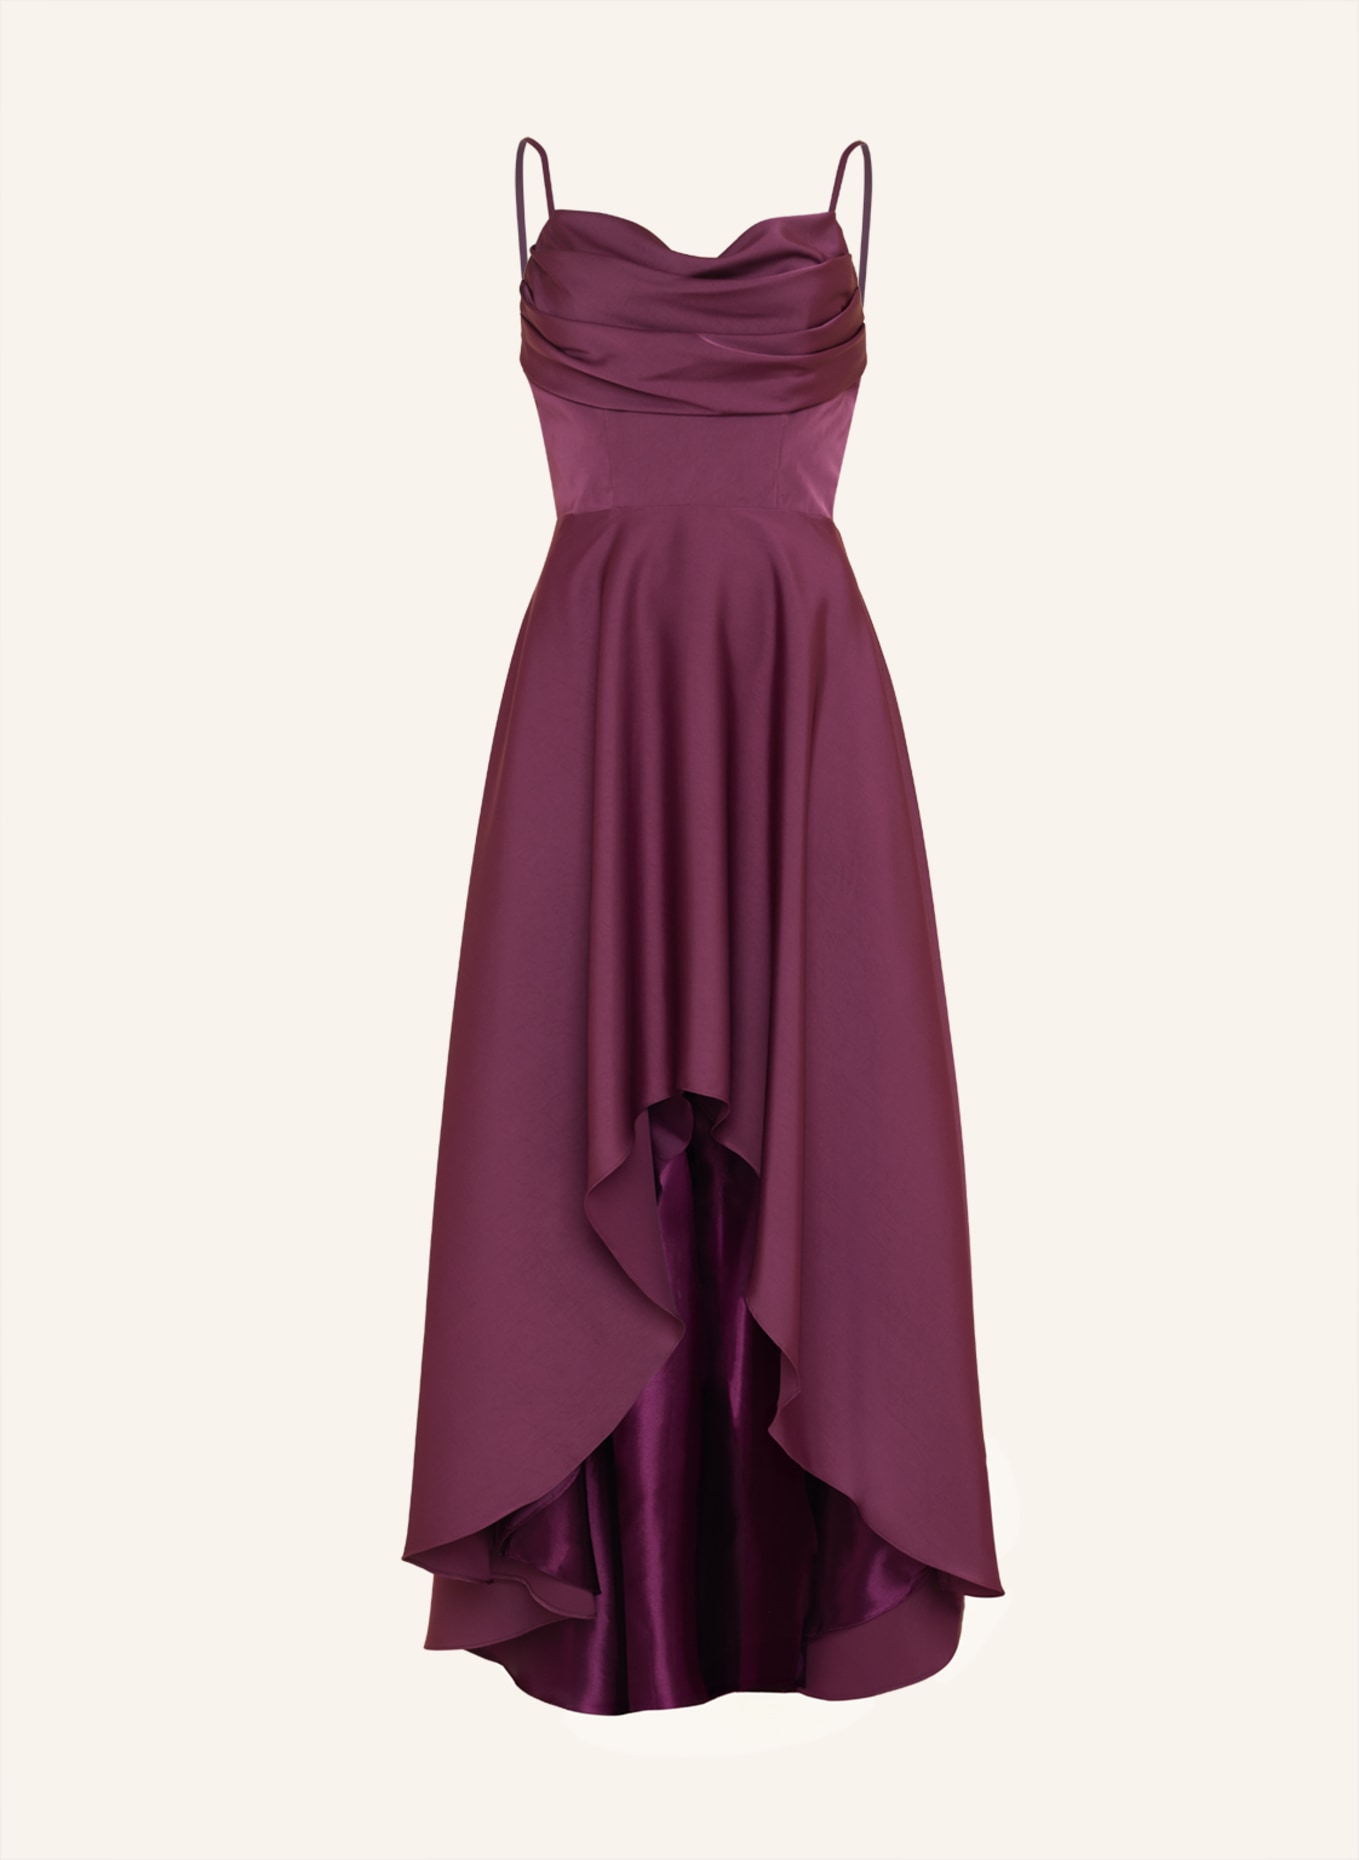 LAONA Abendkleid GIVE ME A SIGN DRESS, Farbe: PINK (Bild 1)